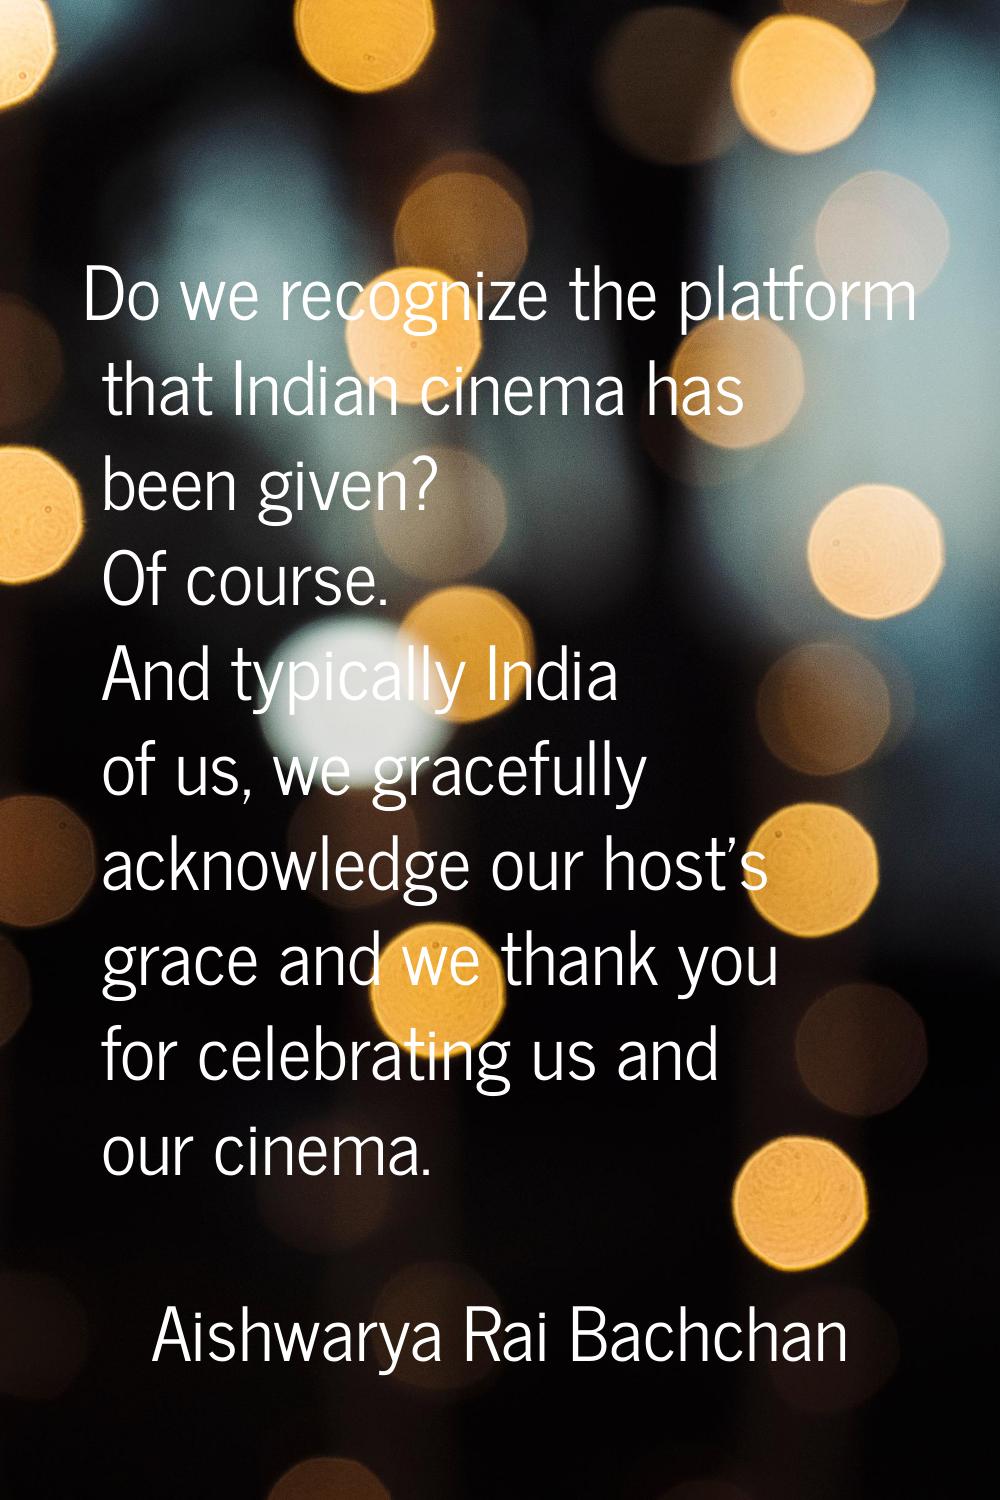 Do we recognize the platform that Indian cinema has been given? Of course. And typically India of u